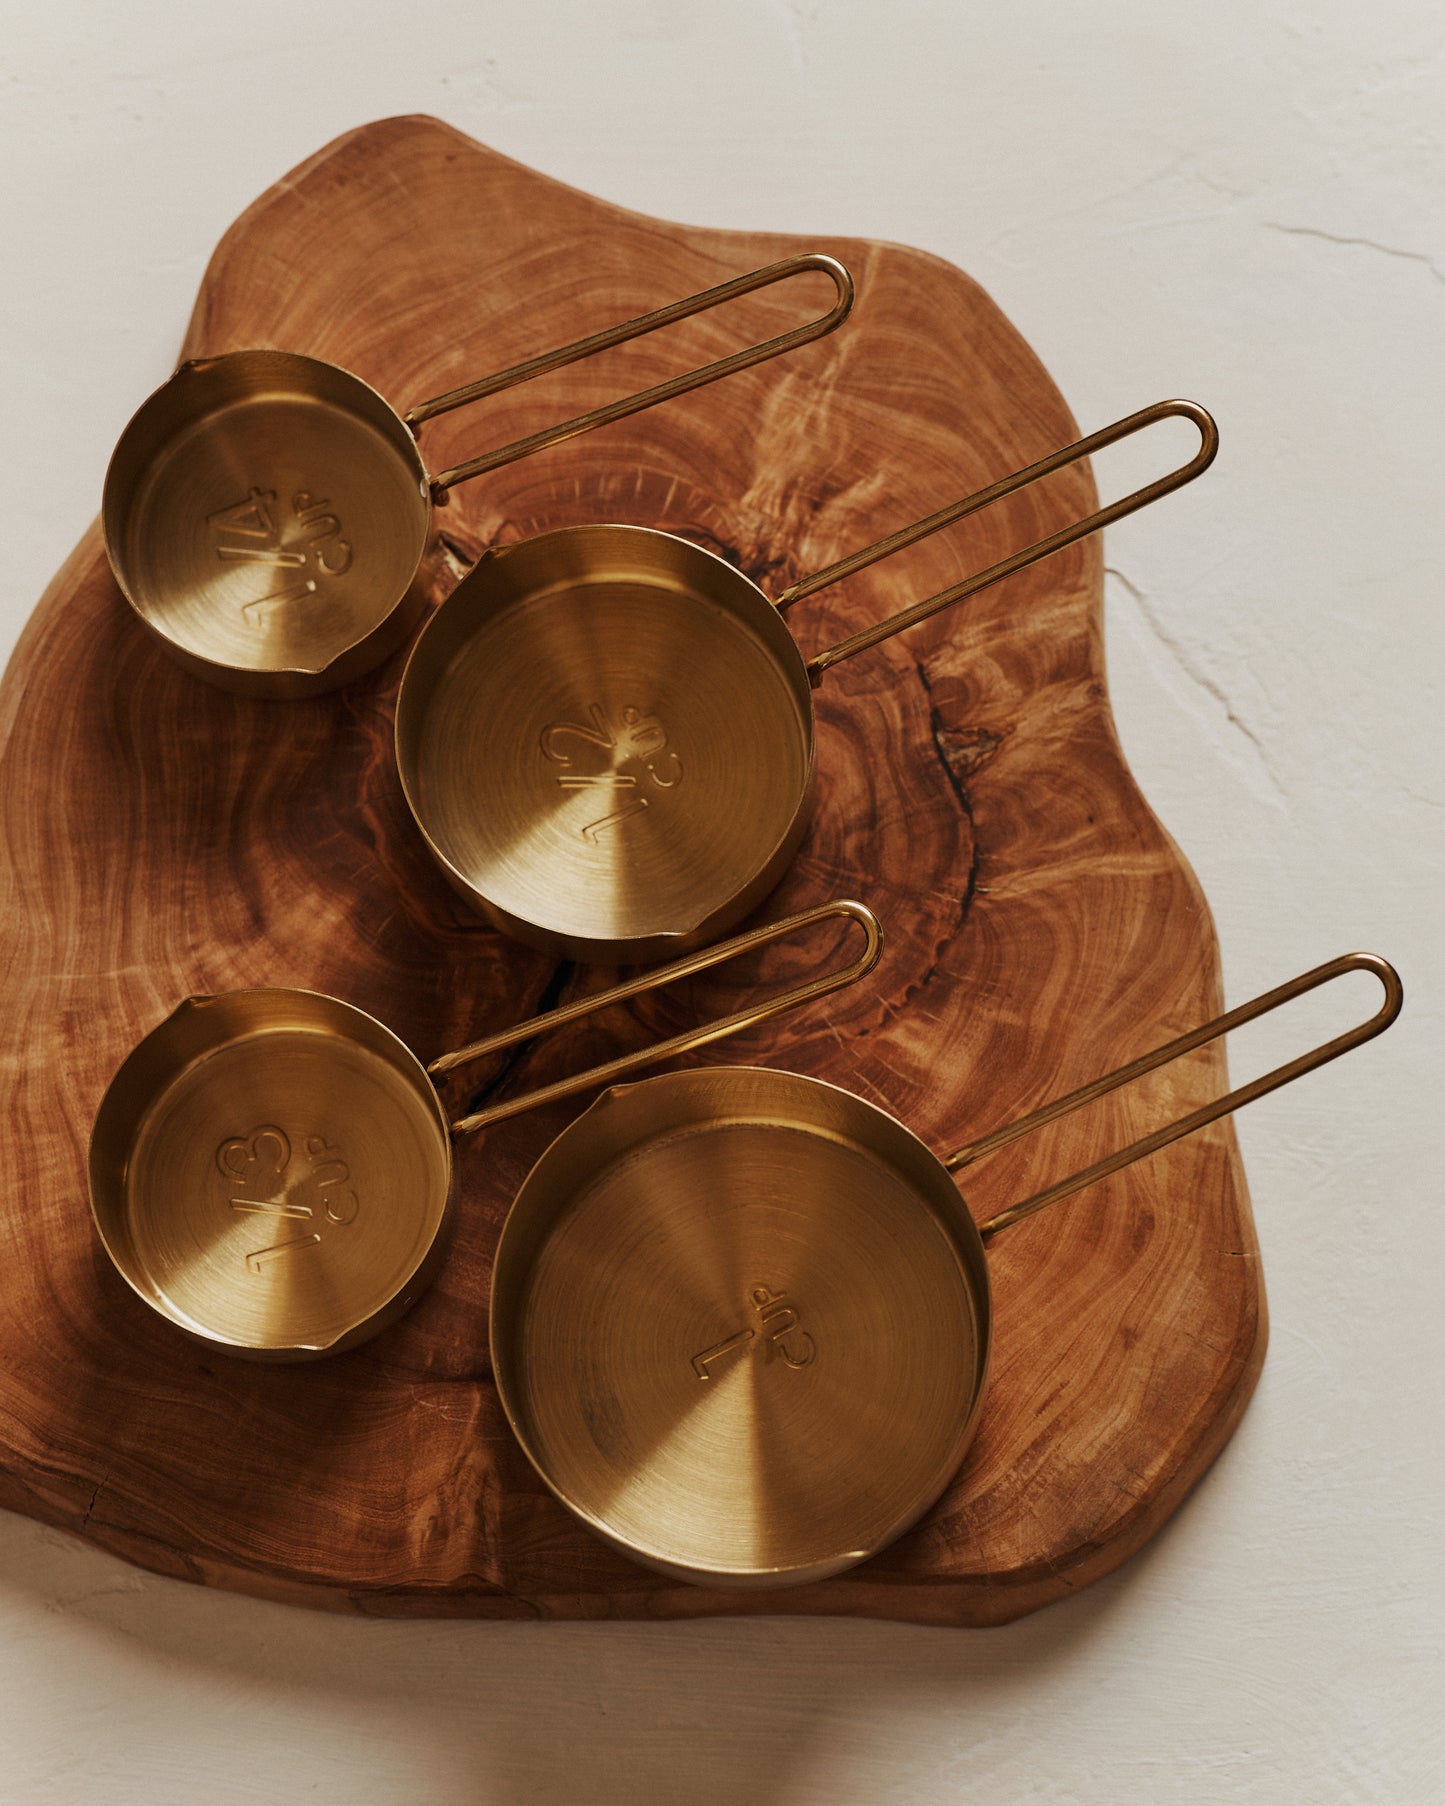 Scoop Gold Finish Measuring Cups